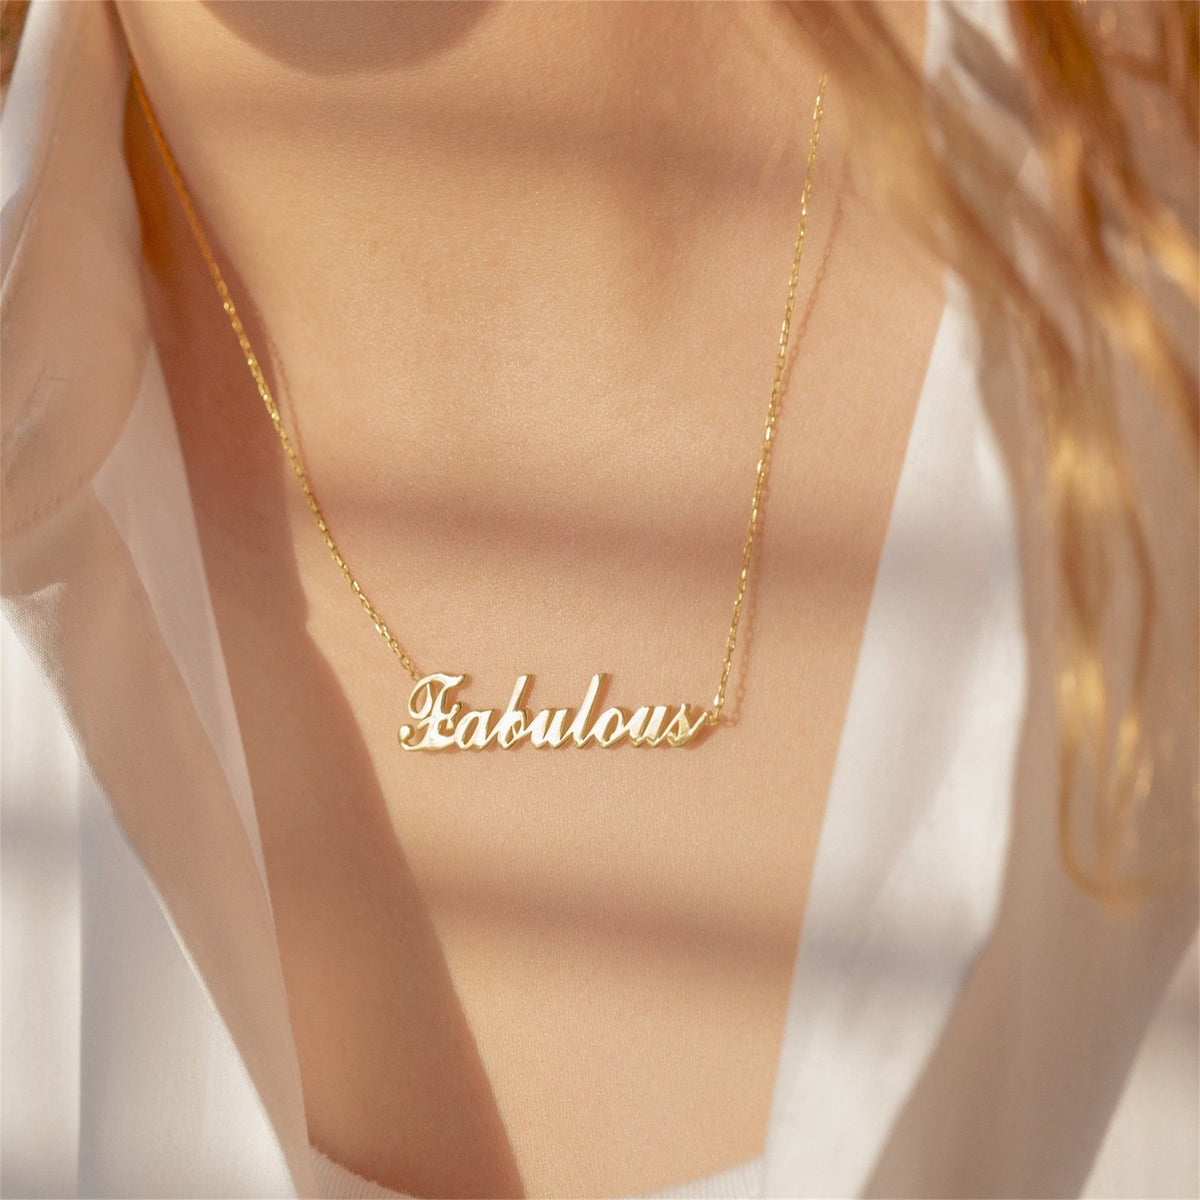 Customizable Name Necklace Personalized Jewelry Name Pendant Stainless Steel Women&#39;s Necklace Chain For Girl Gifts